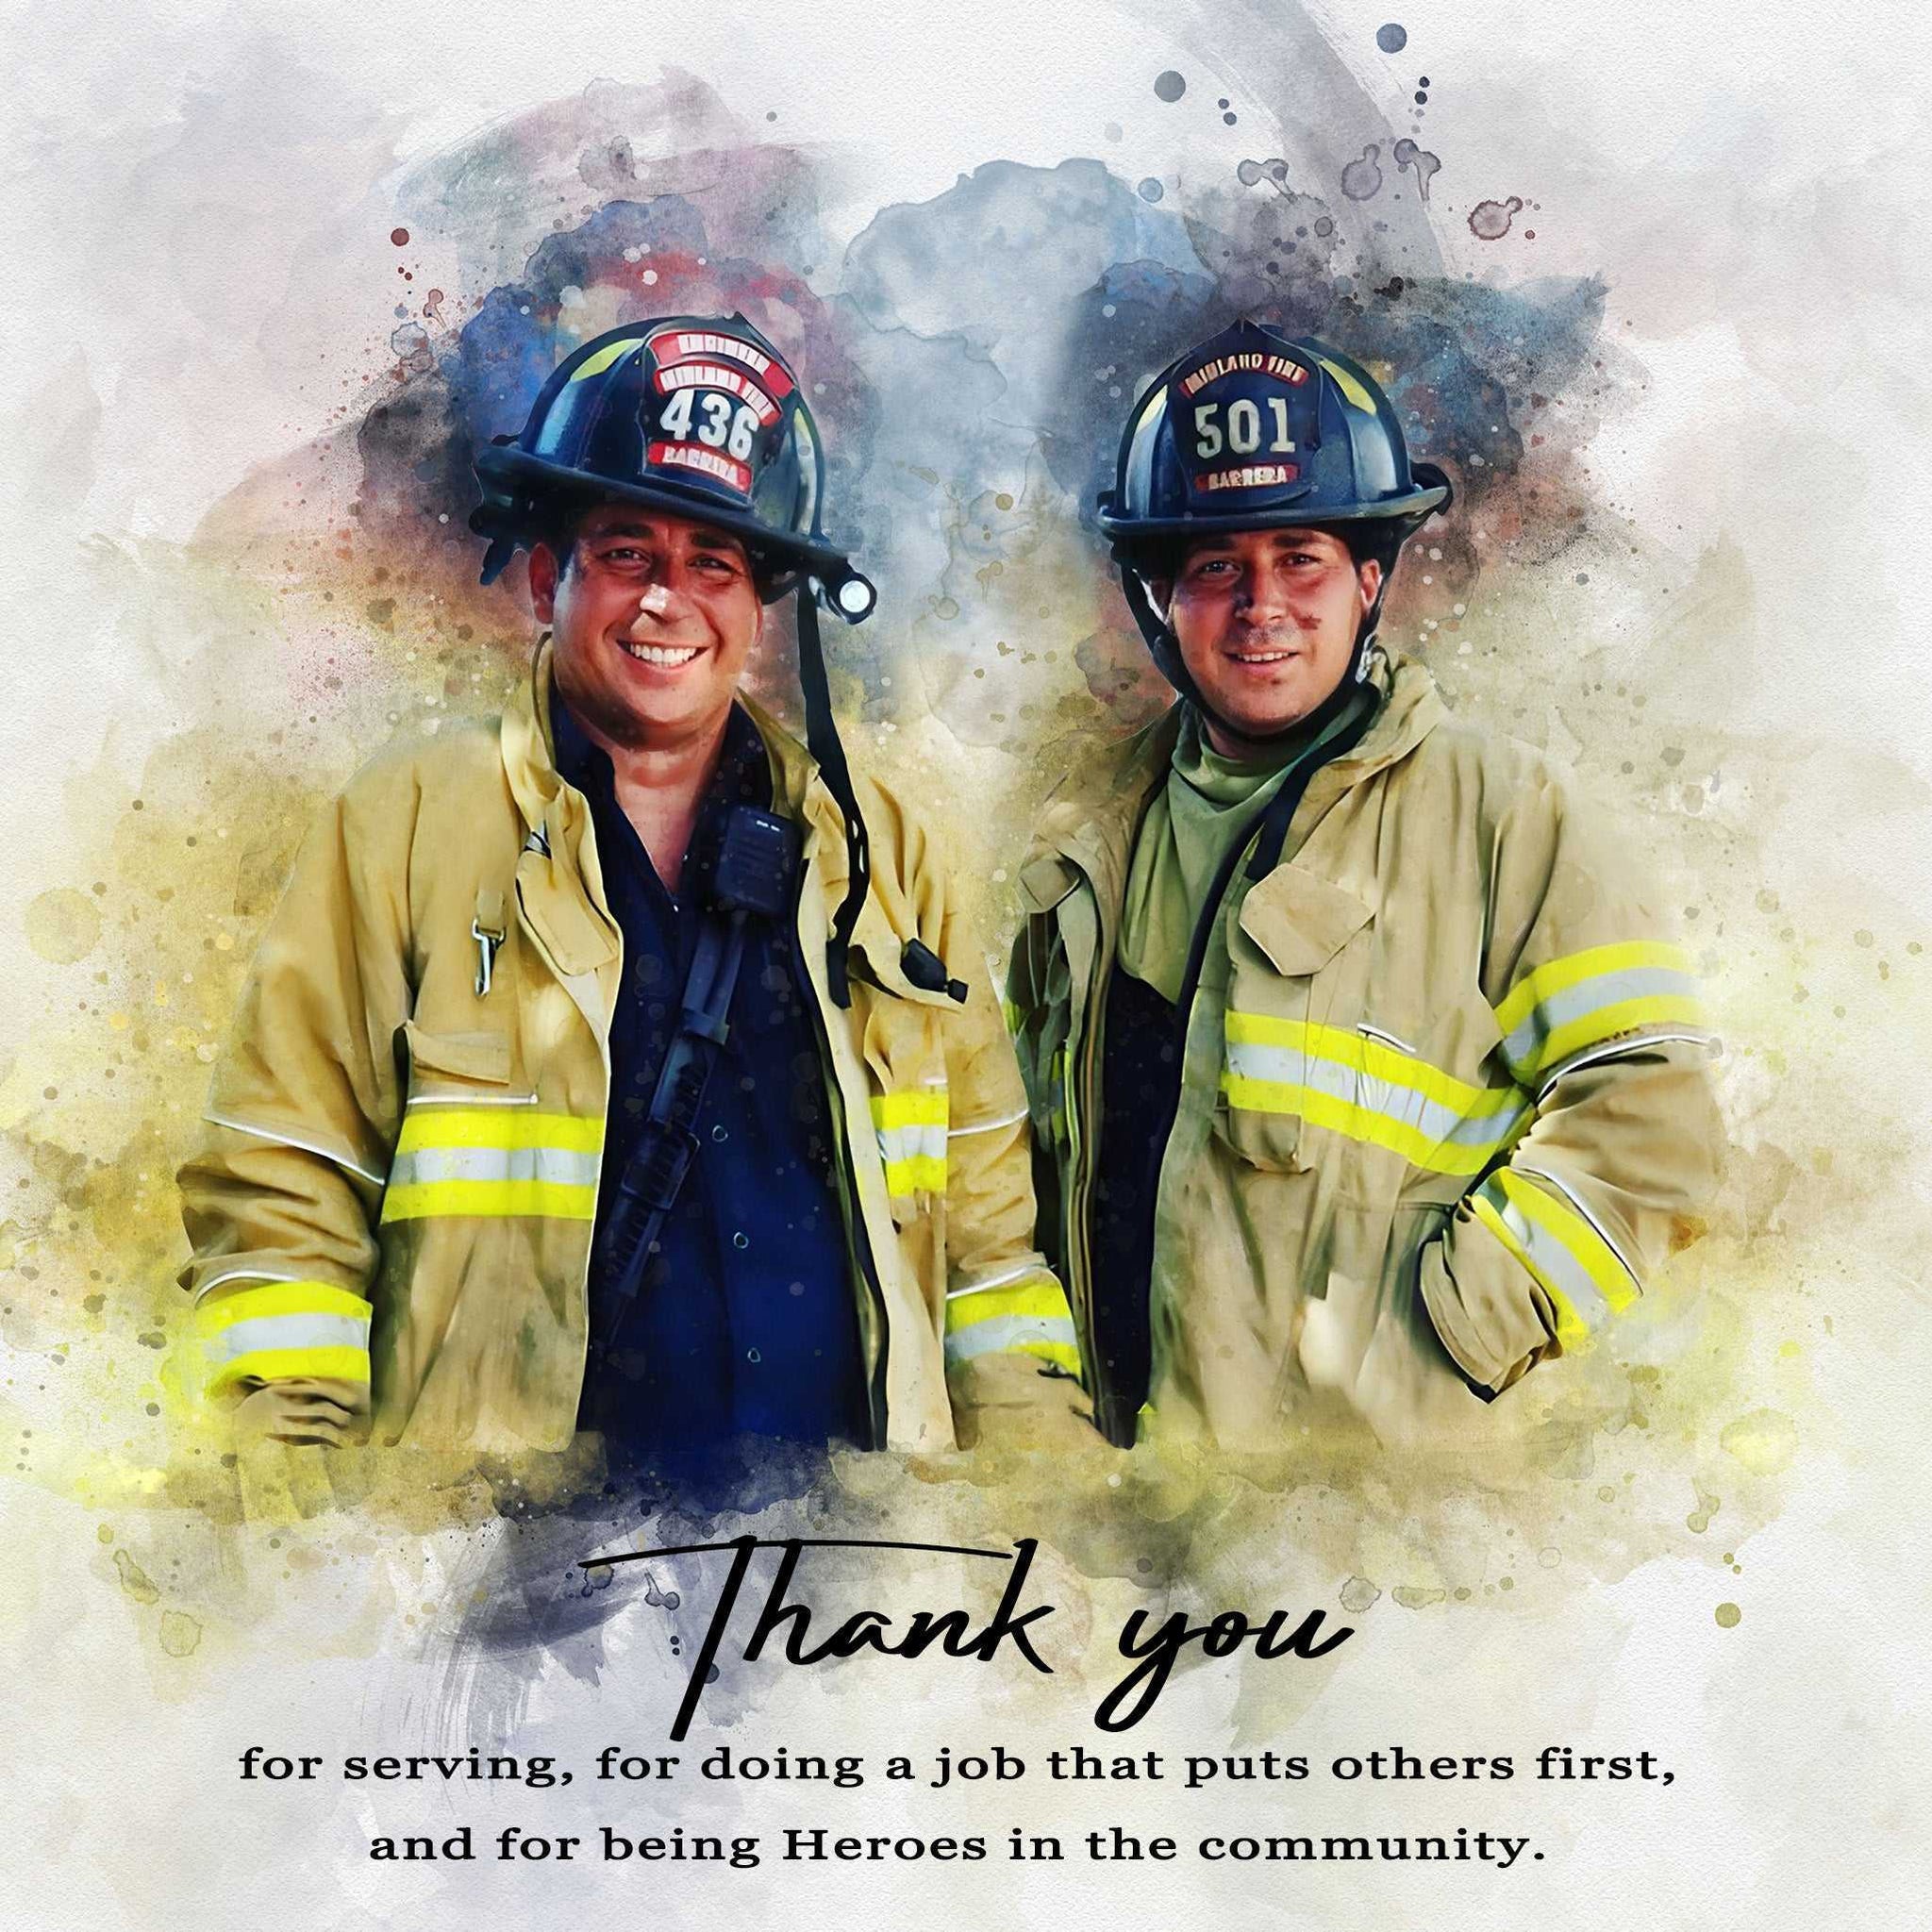 Fire Department Gifts 👨‍🚒🔥 Firefighter Retirement Gifts | Fireman Gifts | Firefighter Presents Ideas | Fire Department Gifts - FromPicToArt